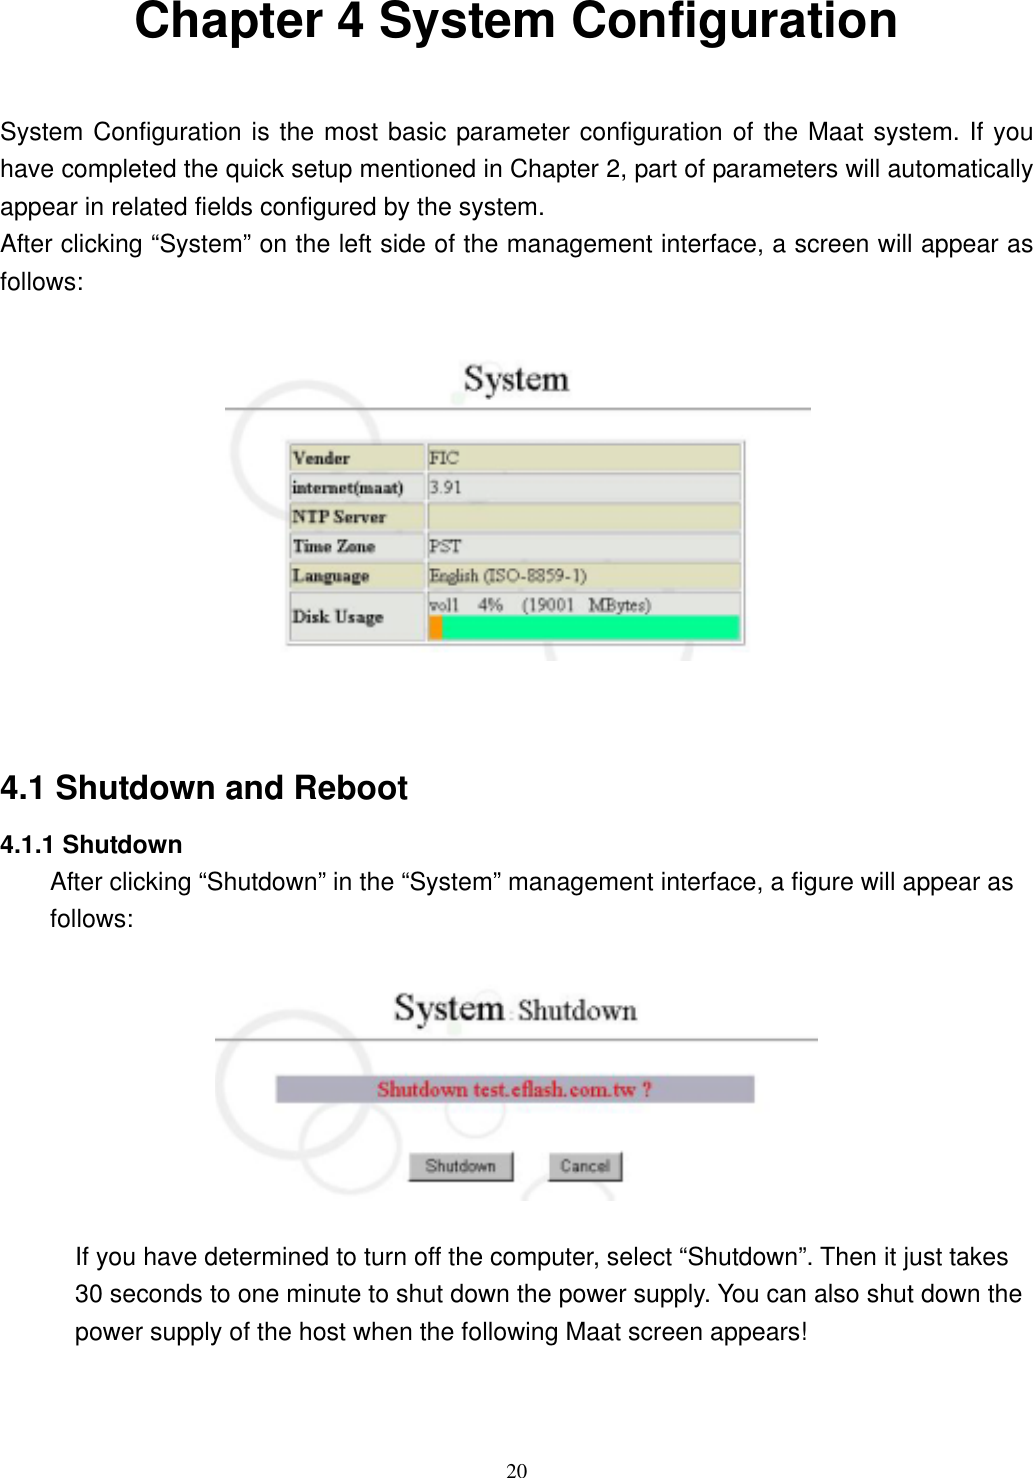  20 Chapter 4 System Configuration  System Configuration is the most basic parameter configuration of the Maat system. If you have completed the quick setup mentioned in Chapter 2, part of parameters will automatically appear in related fields configured by the system. After clicking “System” on the left side of the management interface, a screen will appear as follows:     4.1 Shutdown and Reboot 4.1.1 Shutdown After clicking “Shutdown” in the “System” management interface, a figure will appear as follows:    If you have determined to turn off the computer, select “Shutdown”. Then it just takes 30 seconds to one minute to shut down the power supply. You can also shut down the power supply of the host when the following Maat screen appears!  